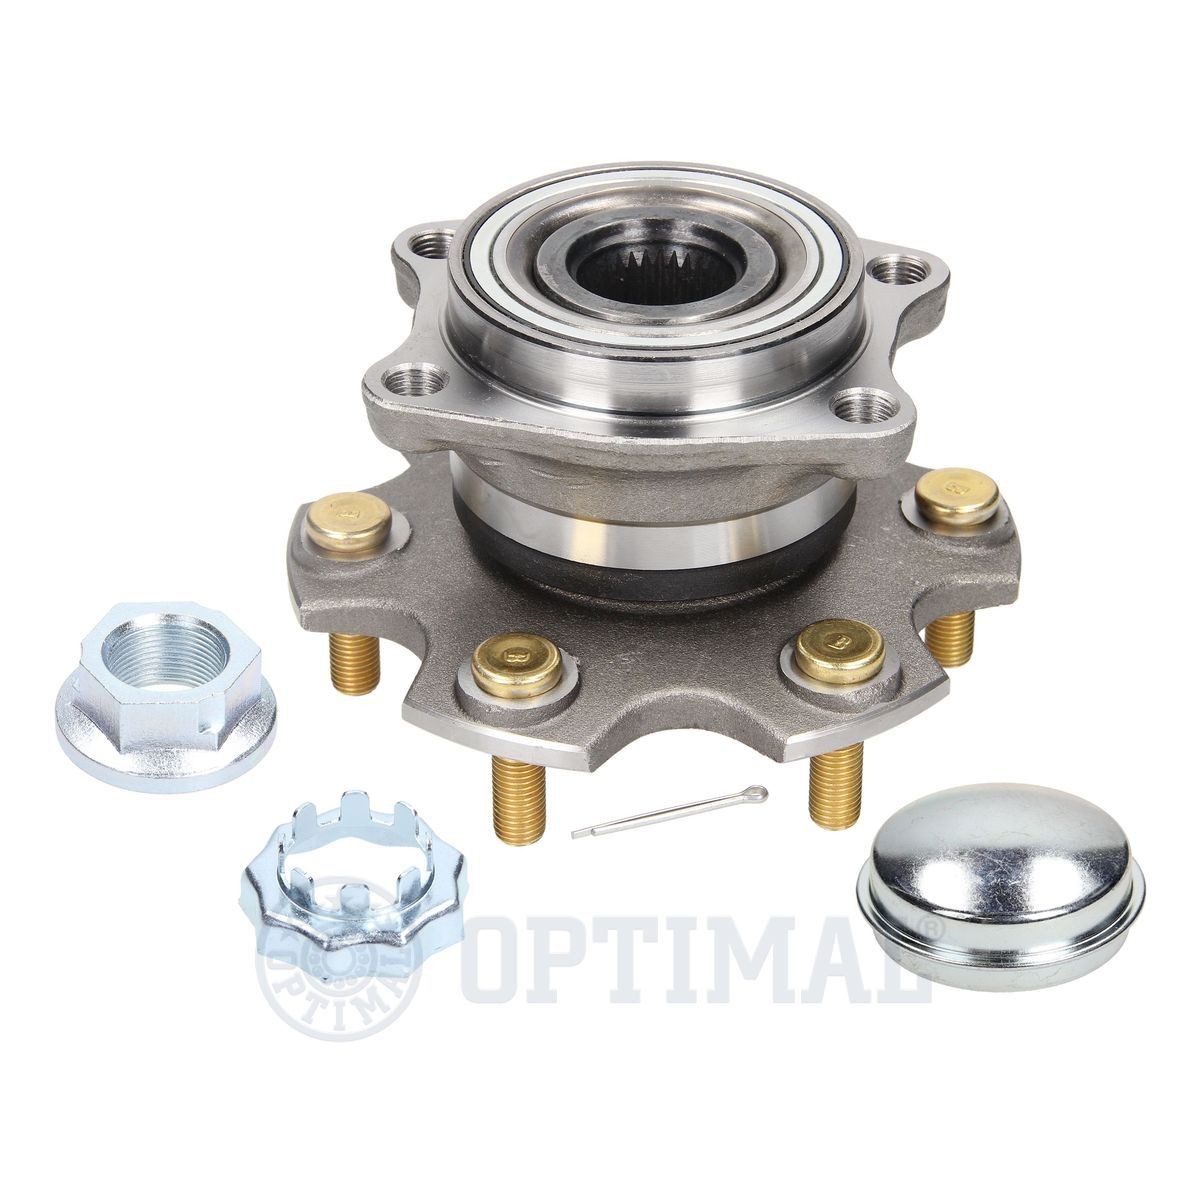 OPTIMAL 952766L Wheel bearing kit with accessories, with wheel hub, with fastening material